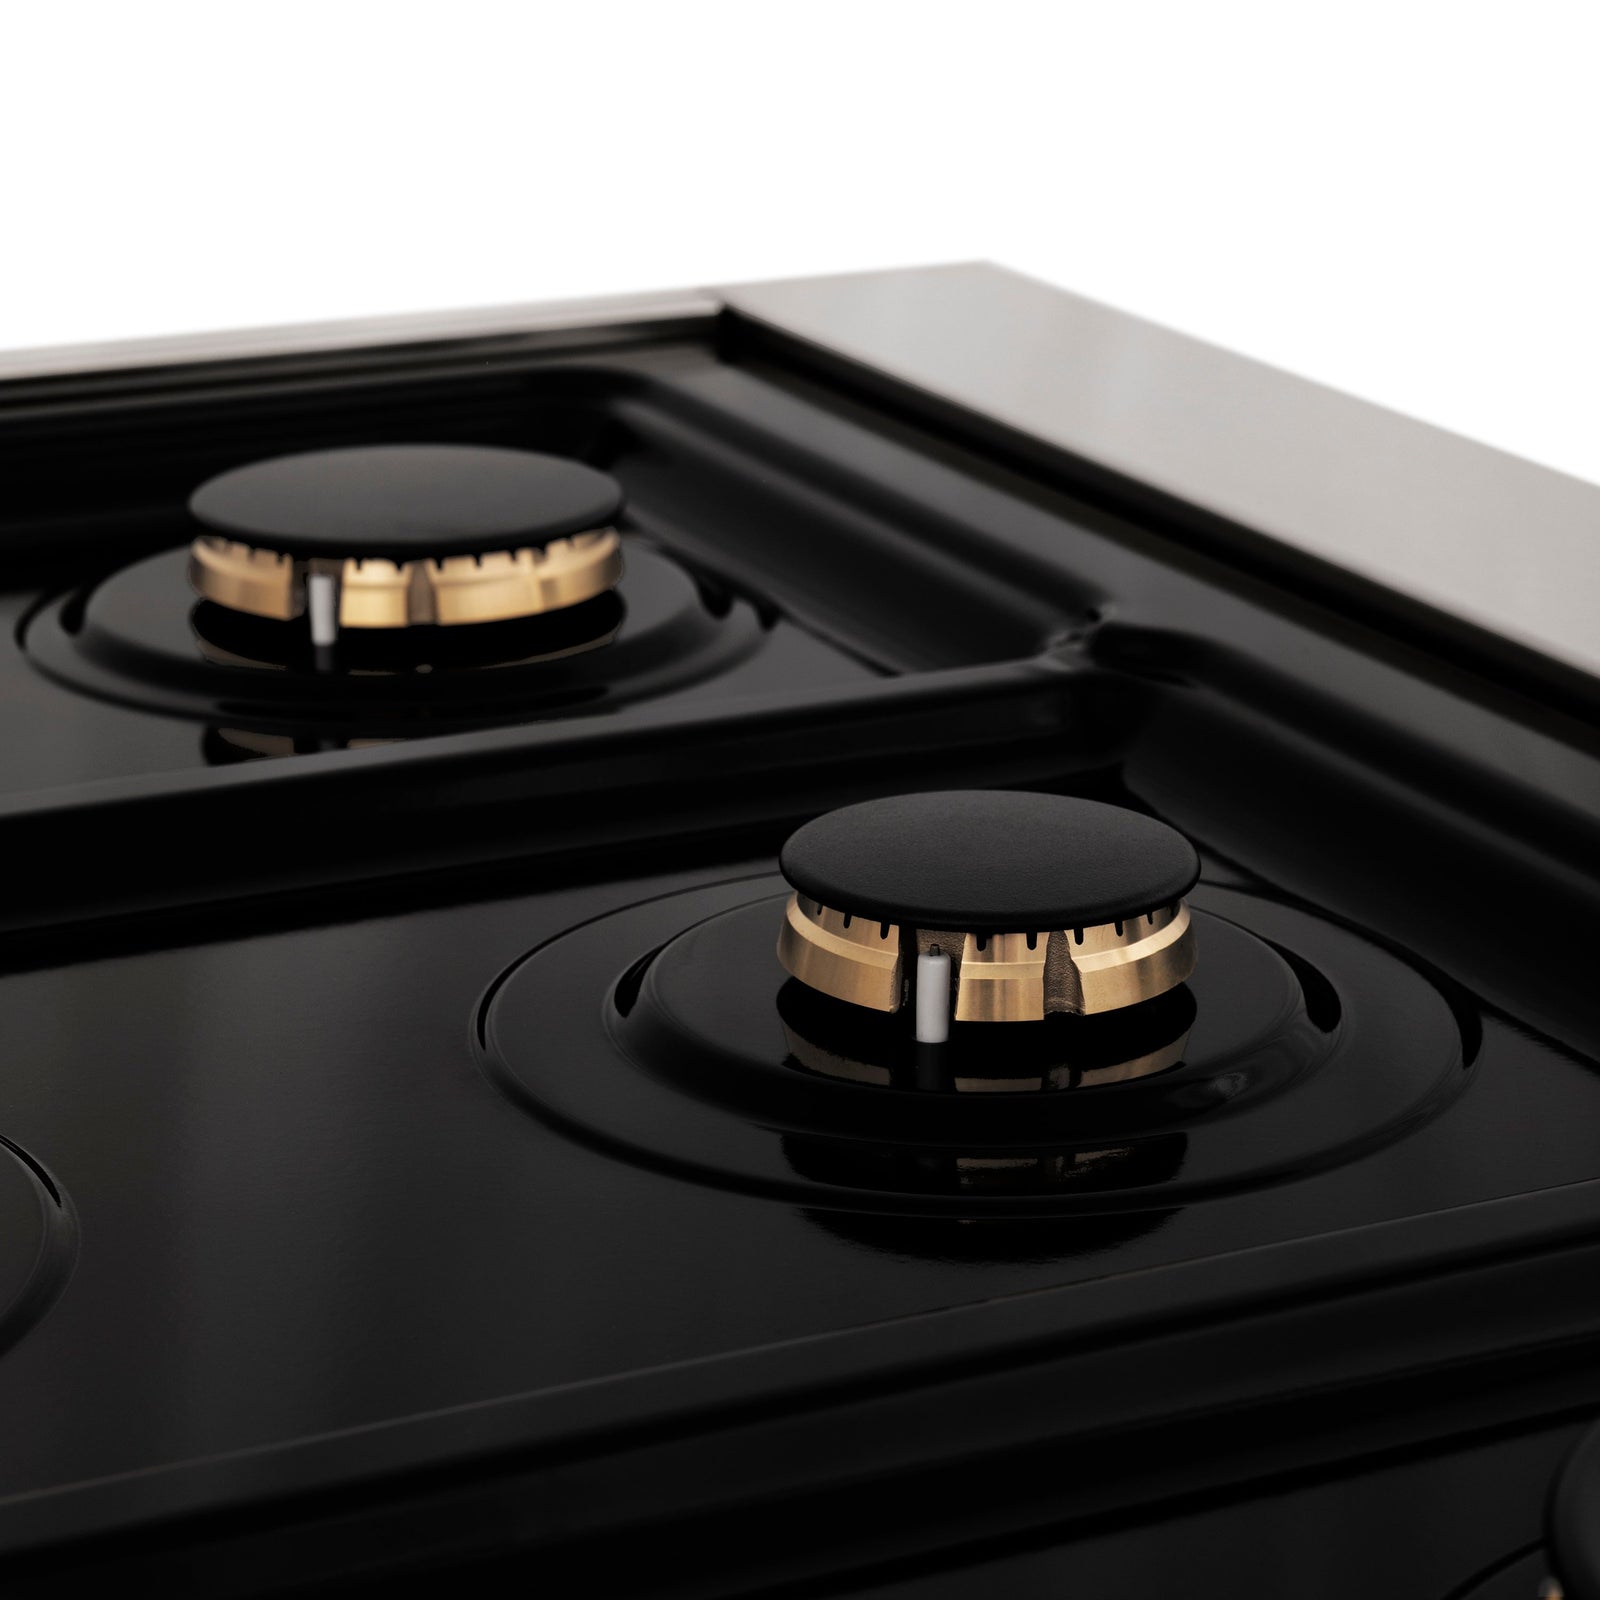 ZLINE Autograph Edition 24 in. Range with Gas Burner and Gas Oven in Stainless Steel with Matte Black Accents, RGZ-24-MB - Smart Kitchen Lab